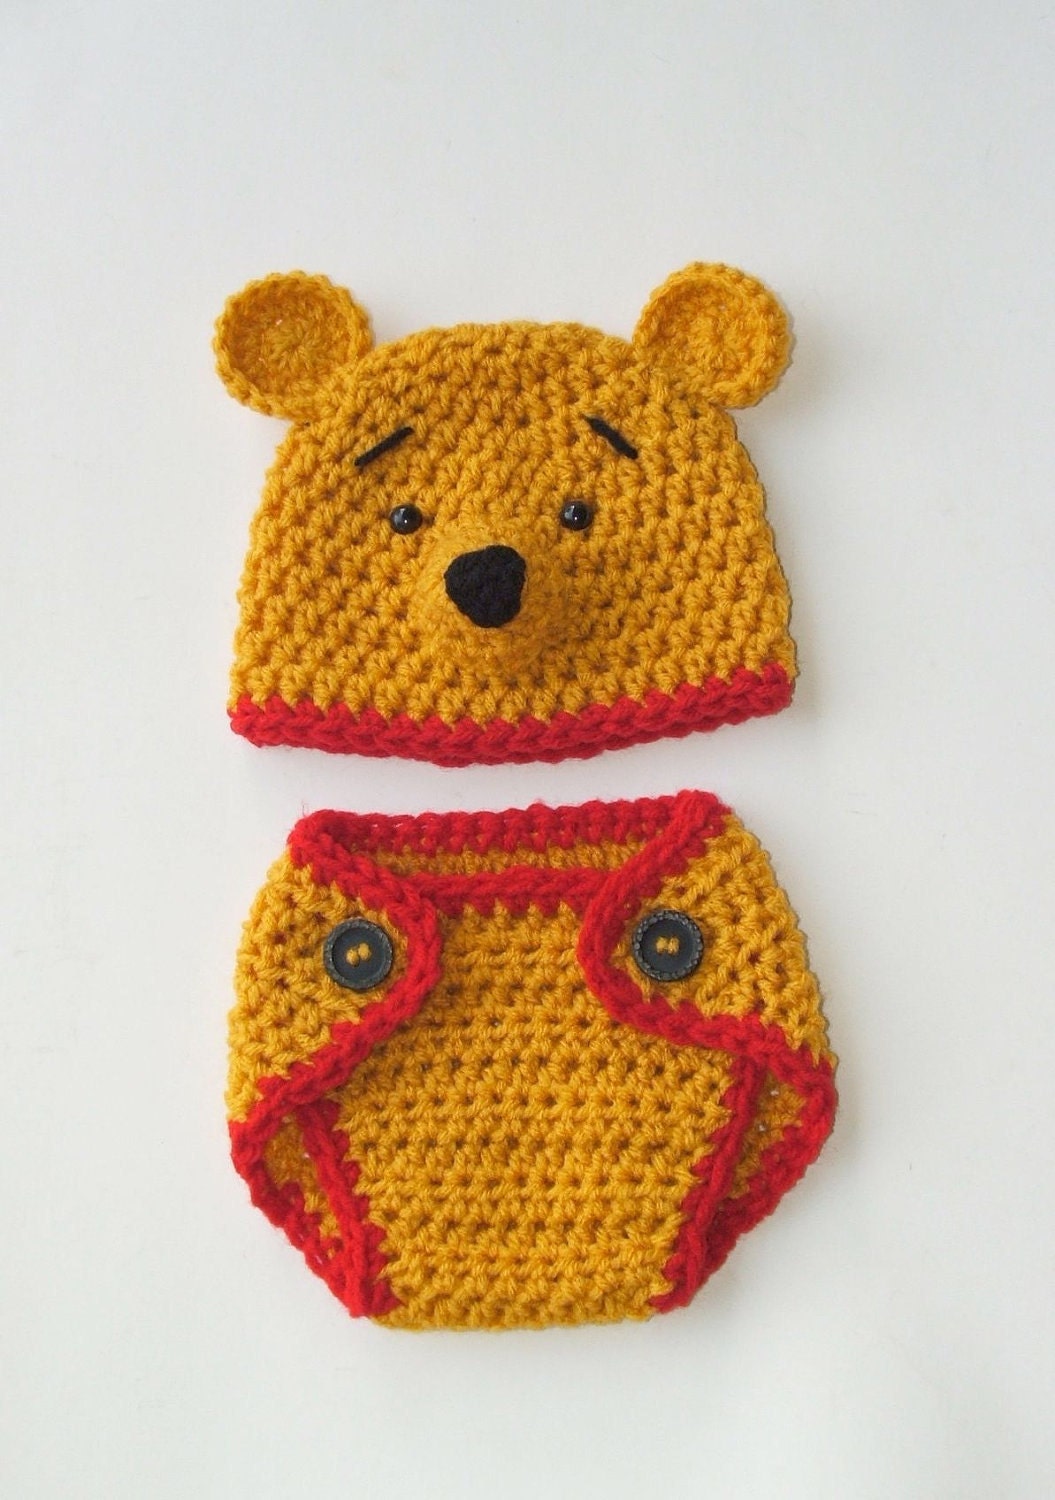 Winnie the Pooh "inspired" HAT ONLY  (Newborn-3 month / 3-6 month sizes)